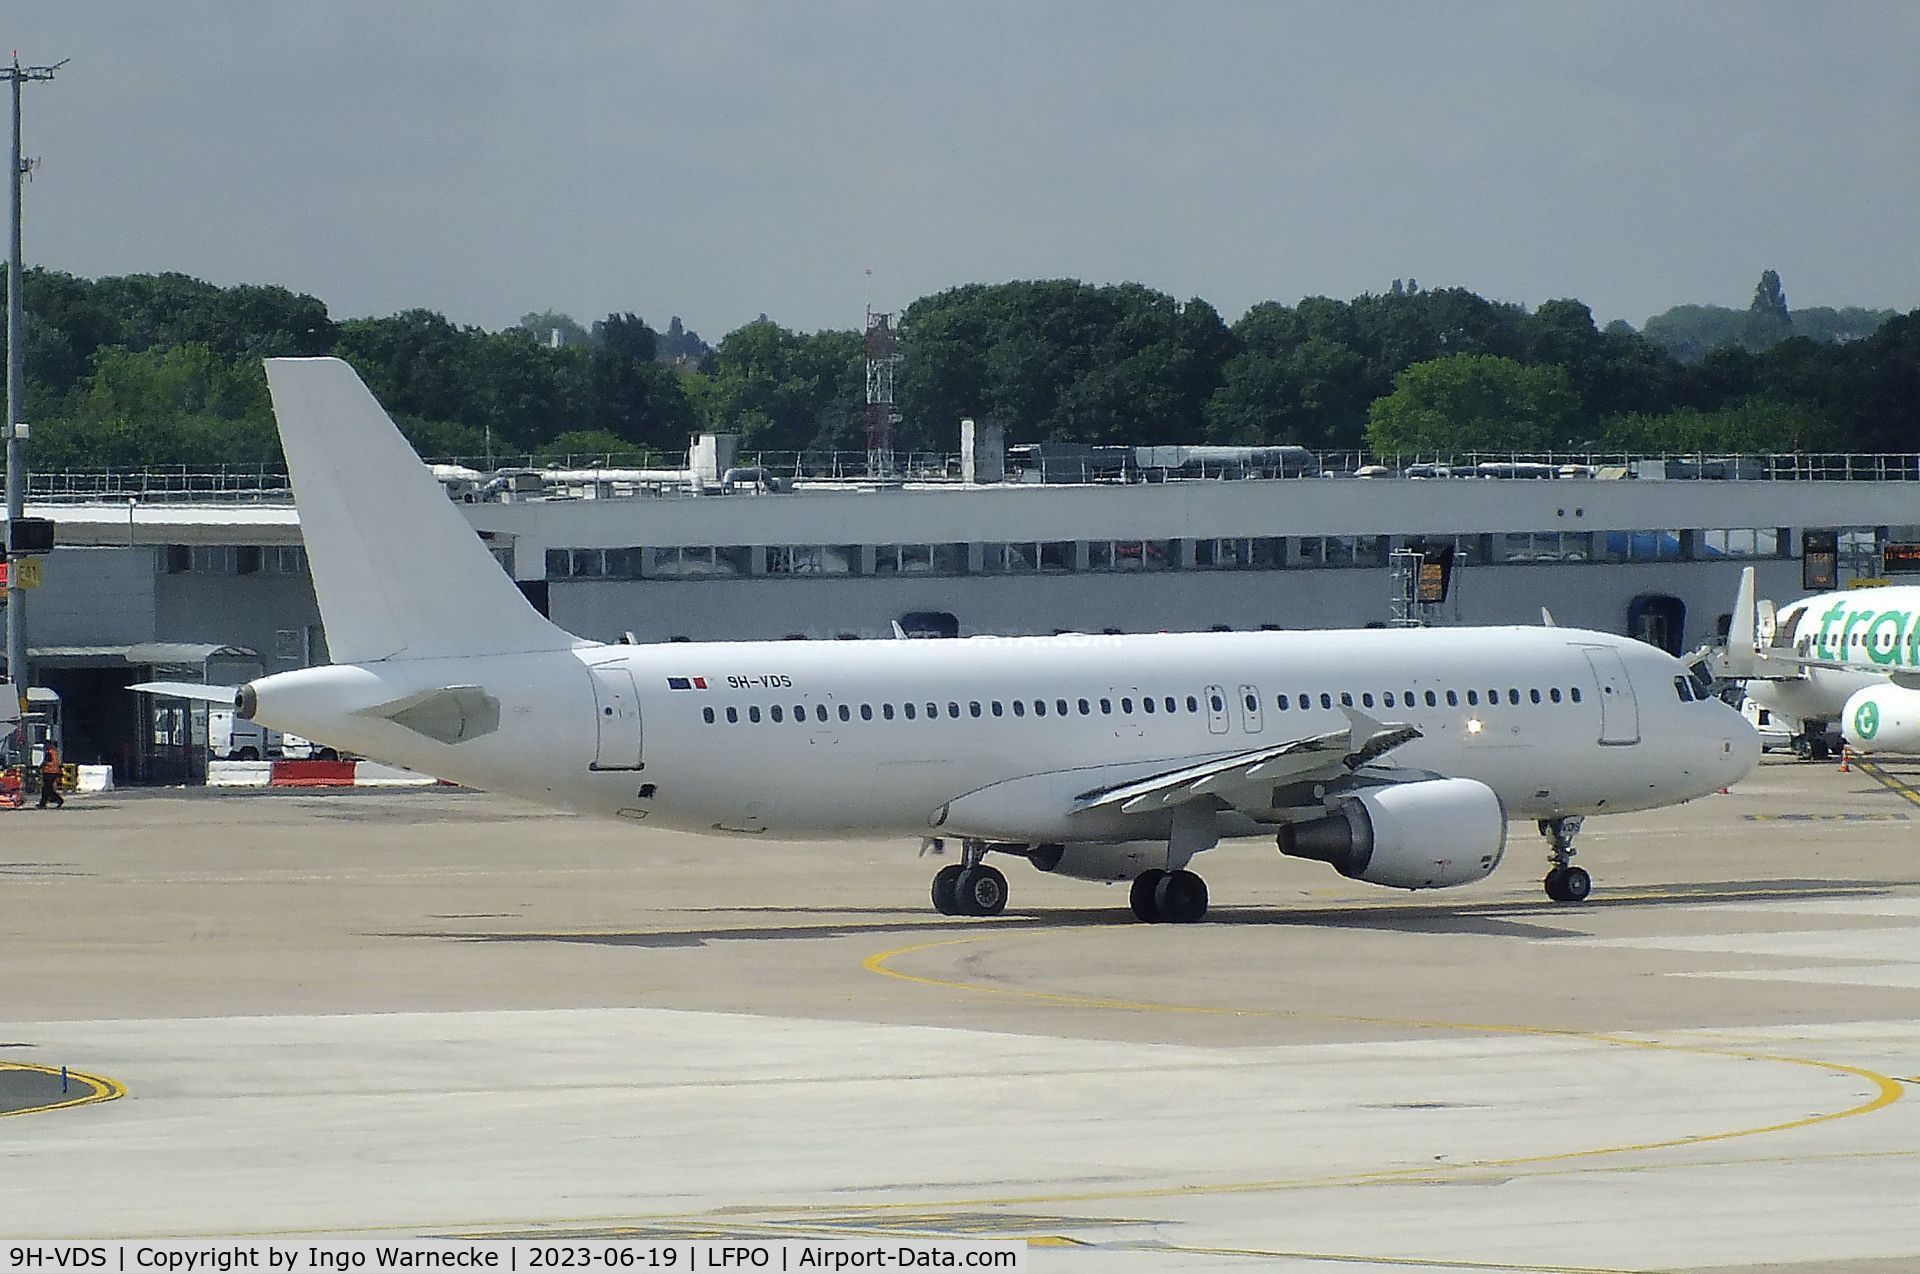 9H-VDS, 2002 Airbus A320-214 C/N 1757, Airbus A320-214 of Galistair Infinite Aviation at Paris-Orly airport